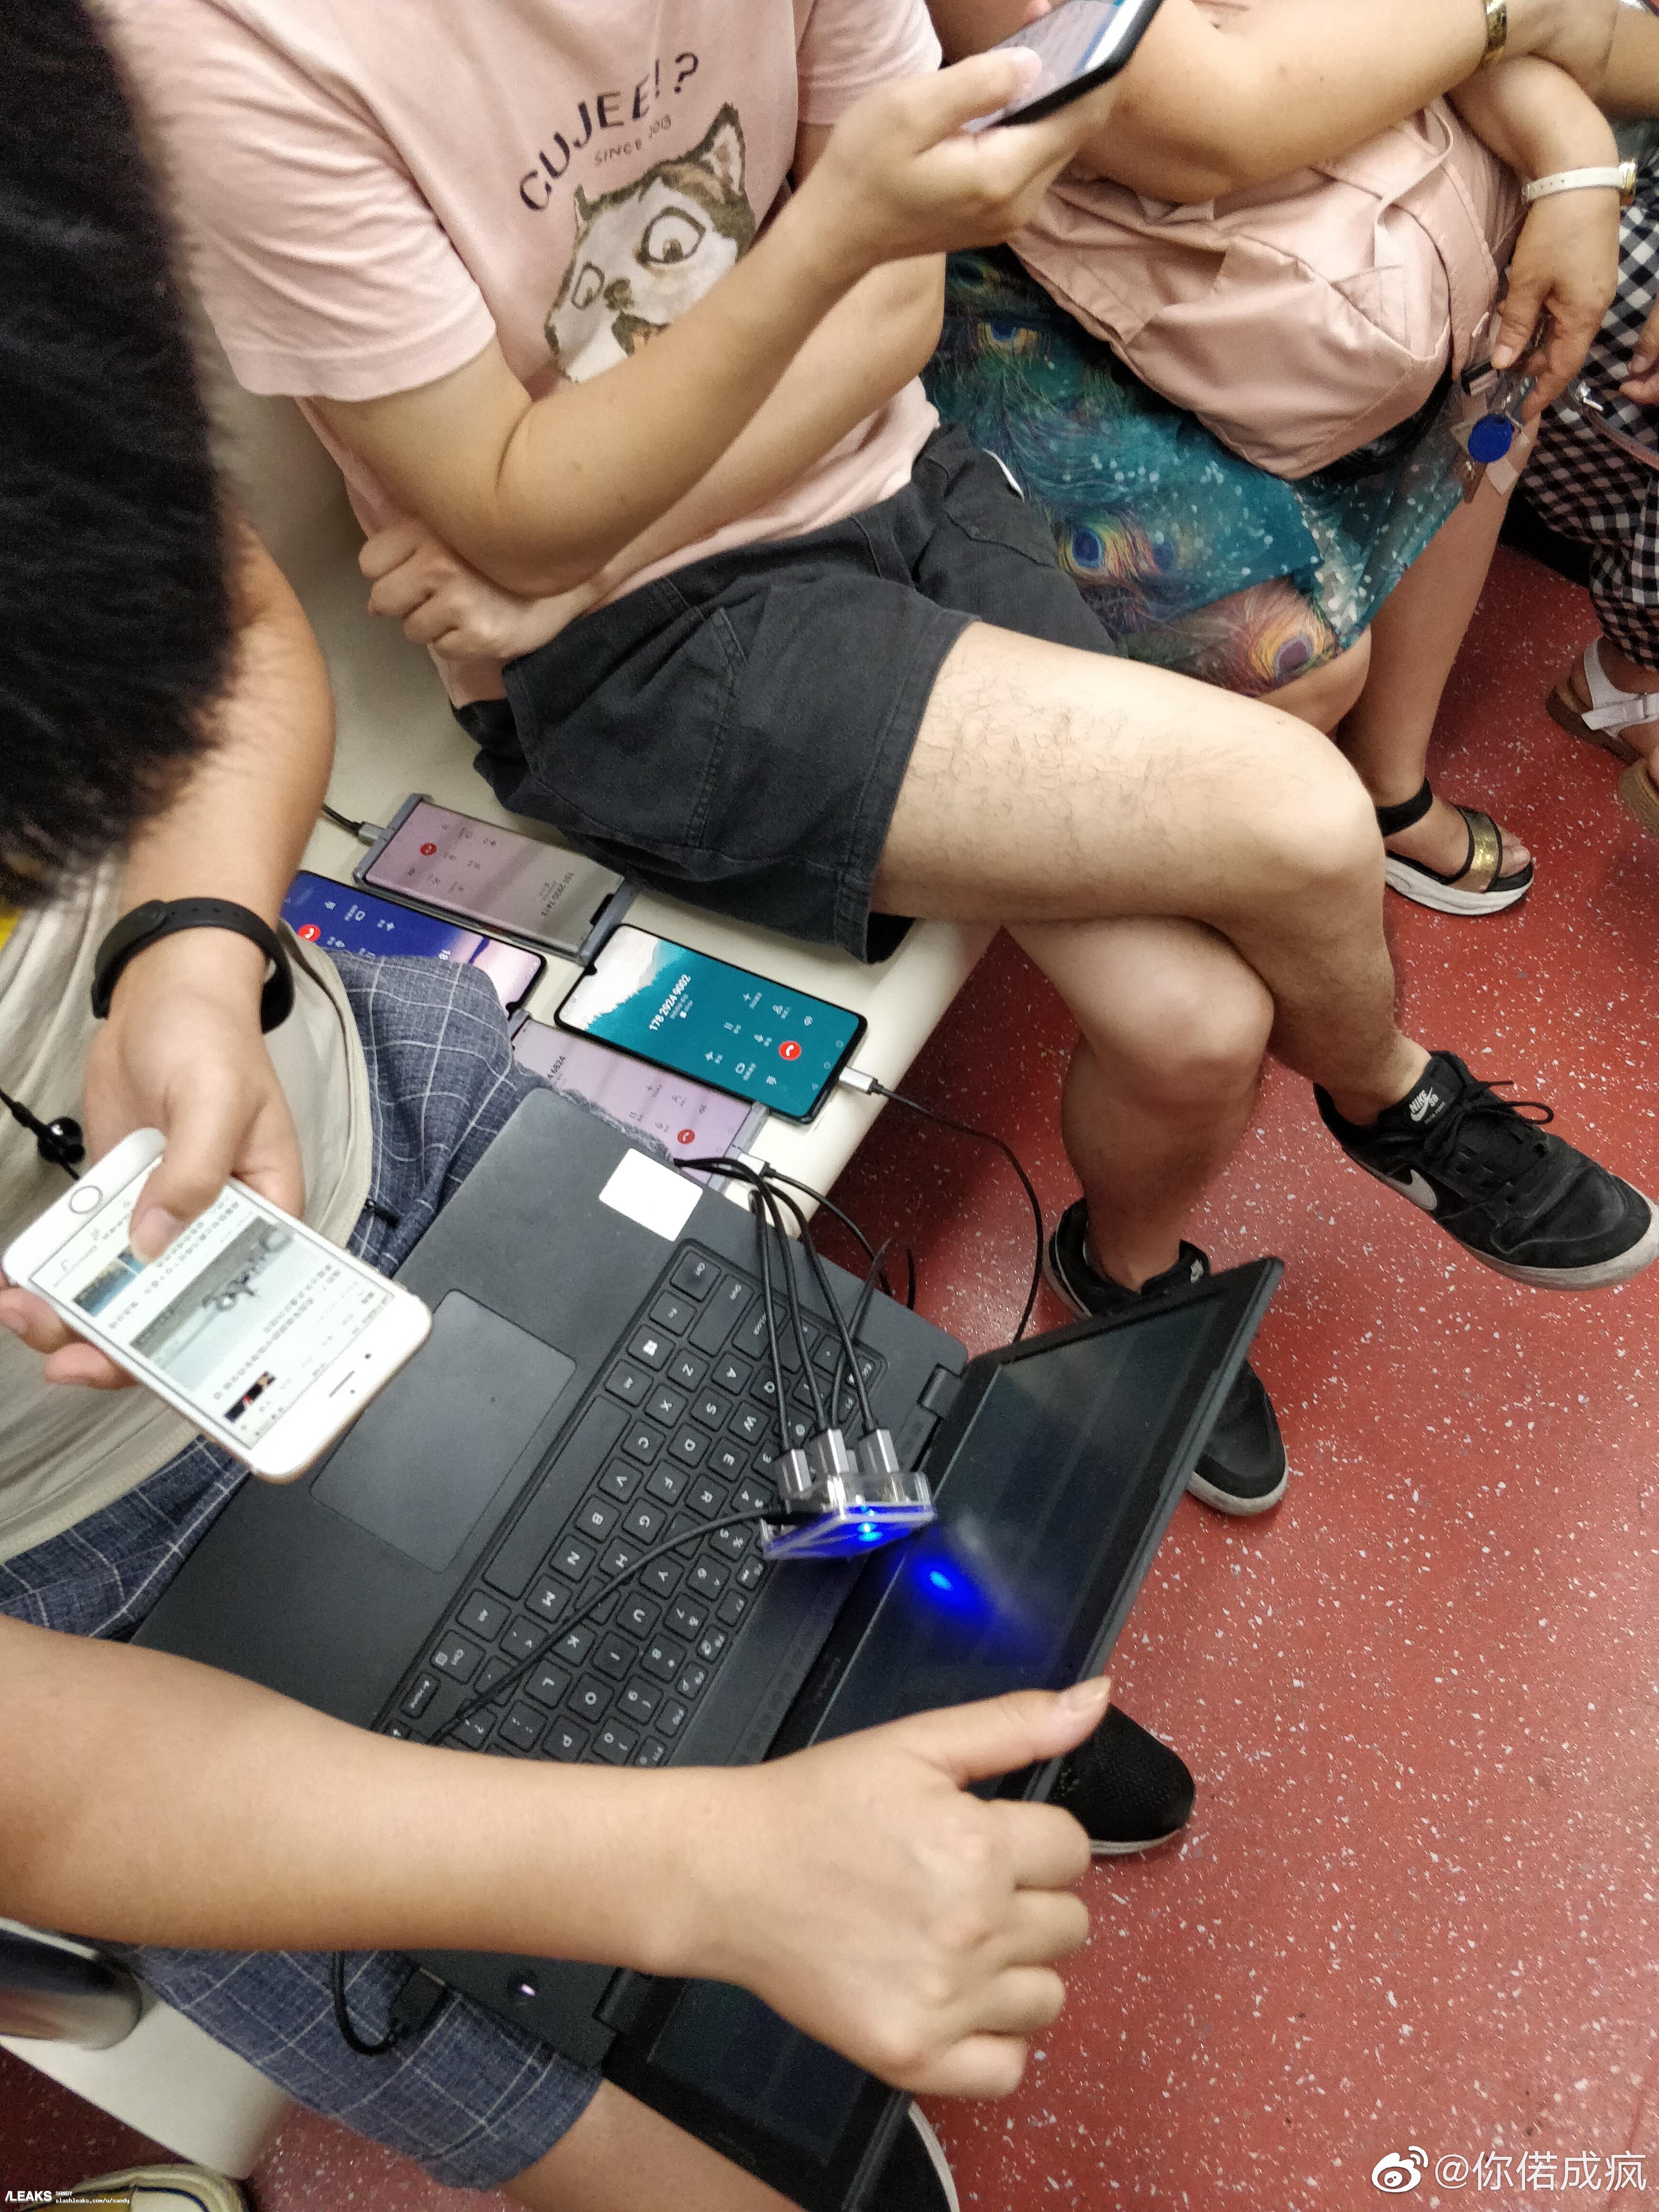 2-mate-30-pro-units-spotted-in-in-public-transport